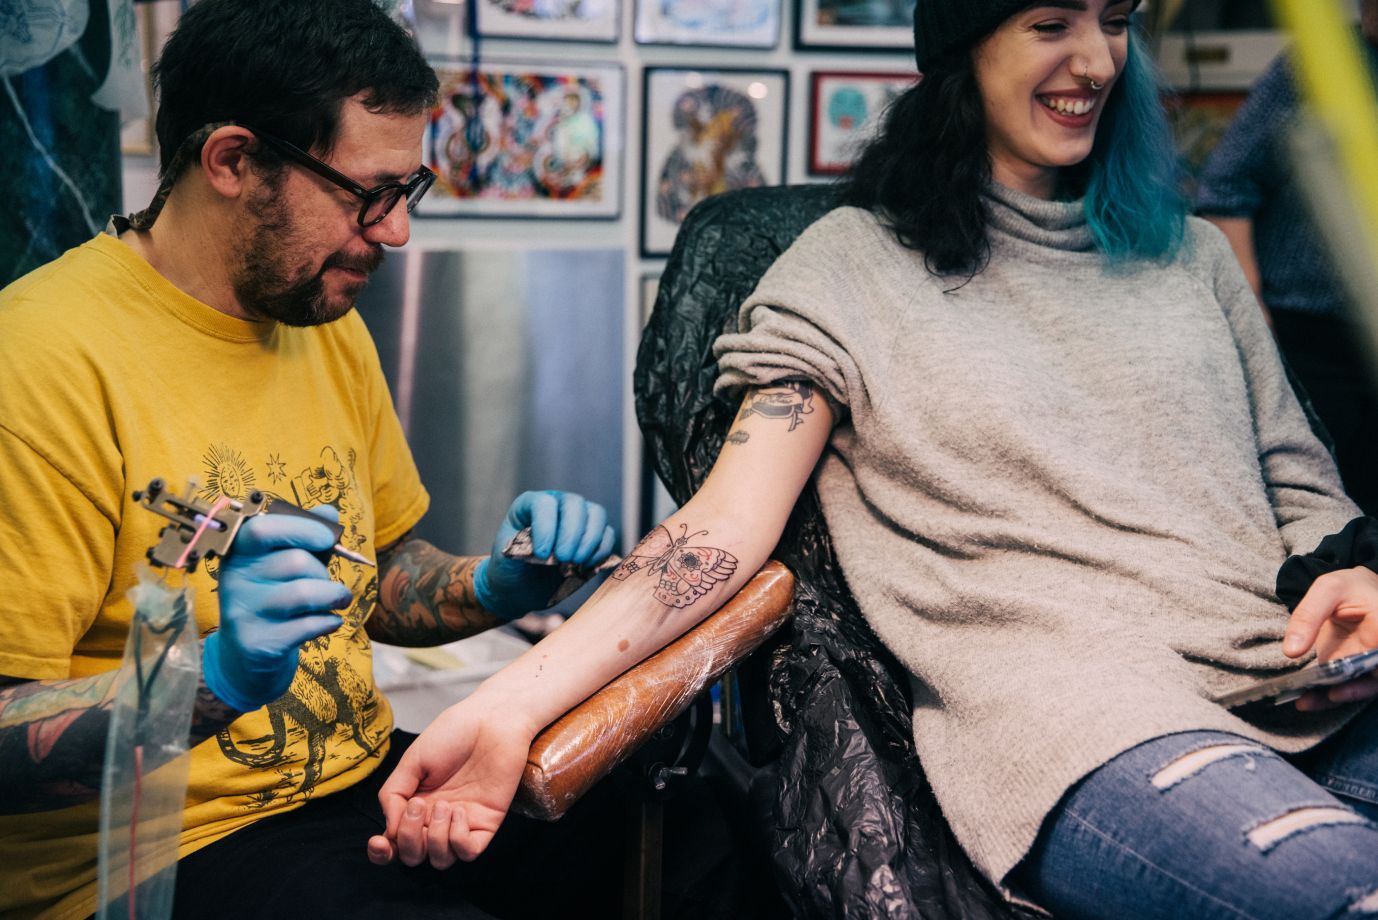 Golden Knights fans get team logo tattooed, in hair and on nails | Business